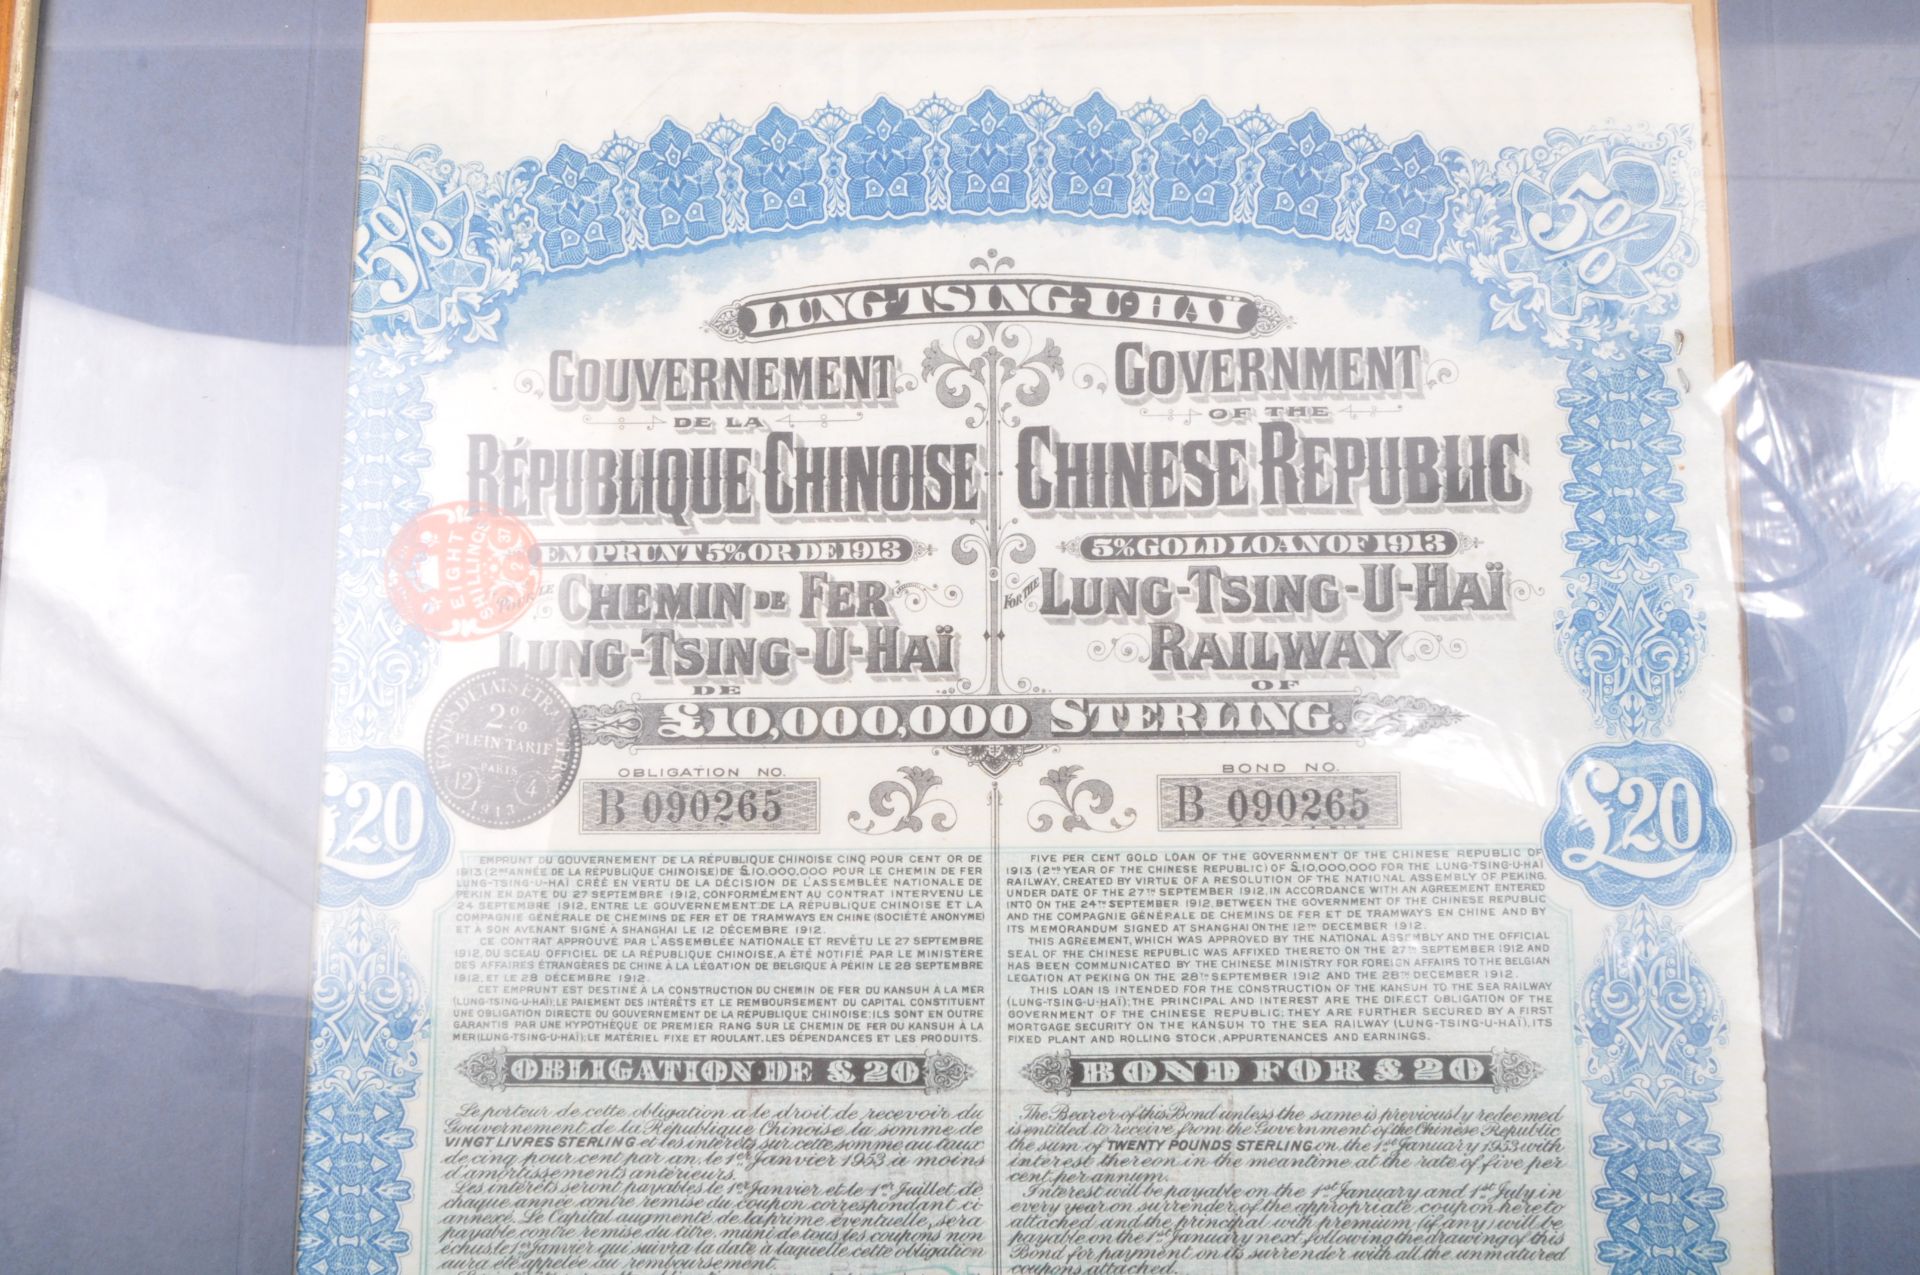 EARLY 20TH CENTURY CHINESE REPUBLIC PERIOD RAILWAY BOND - Image 4 of 5